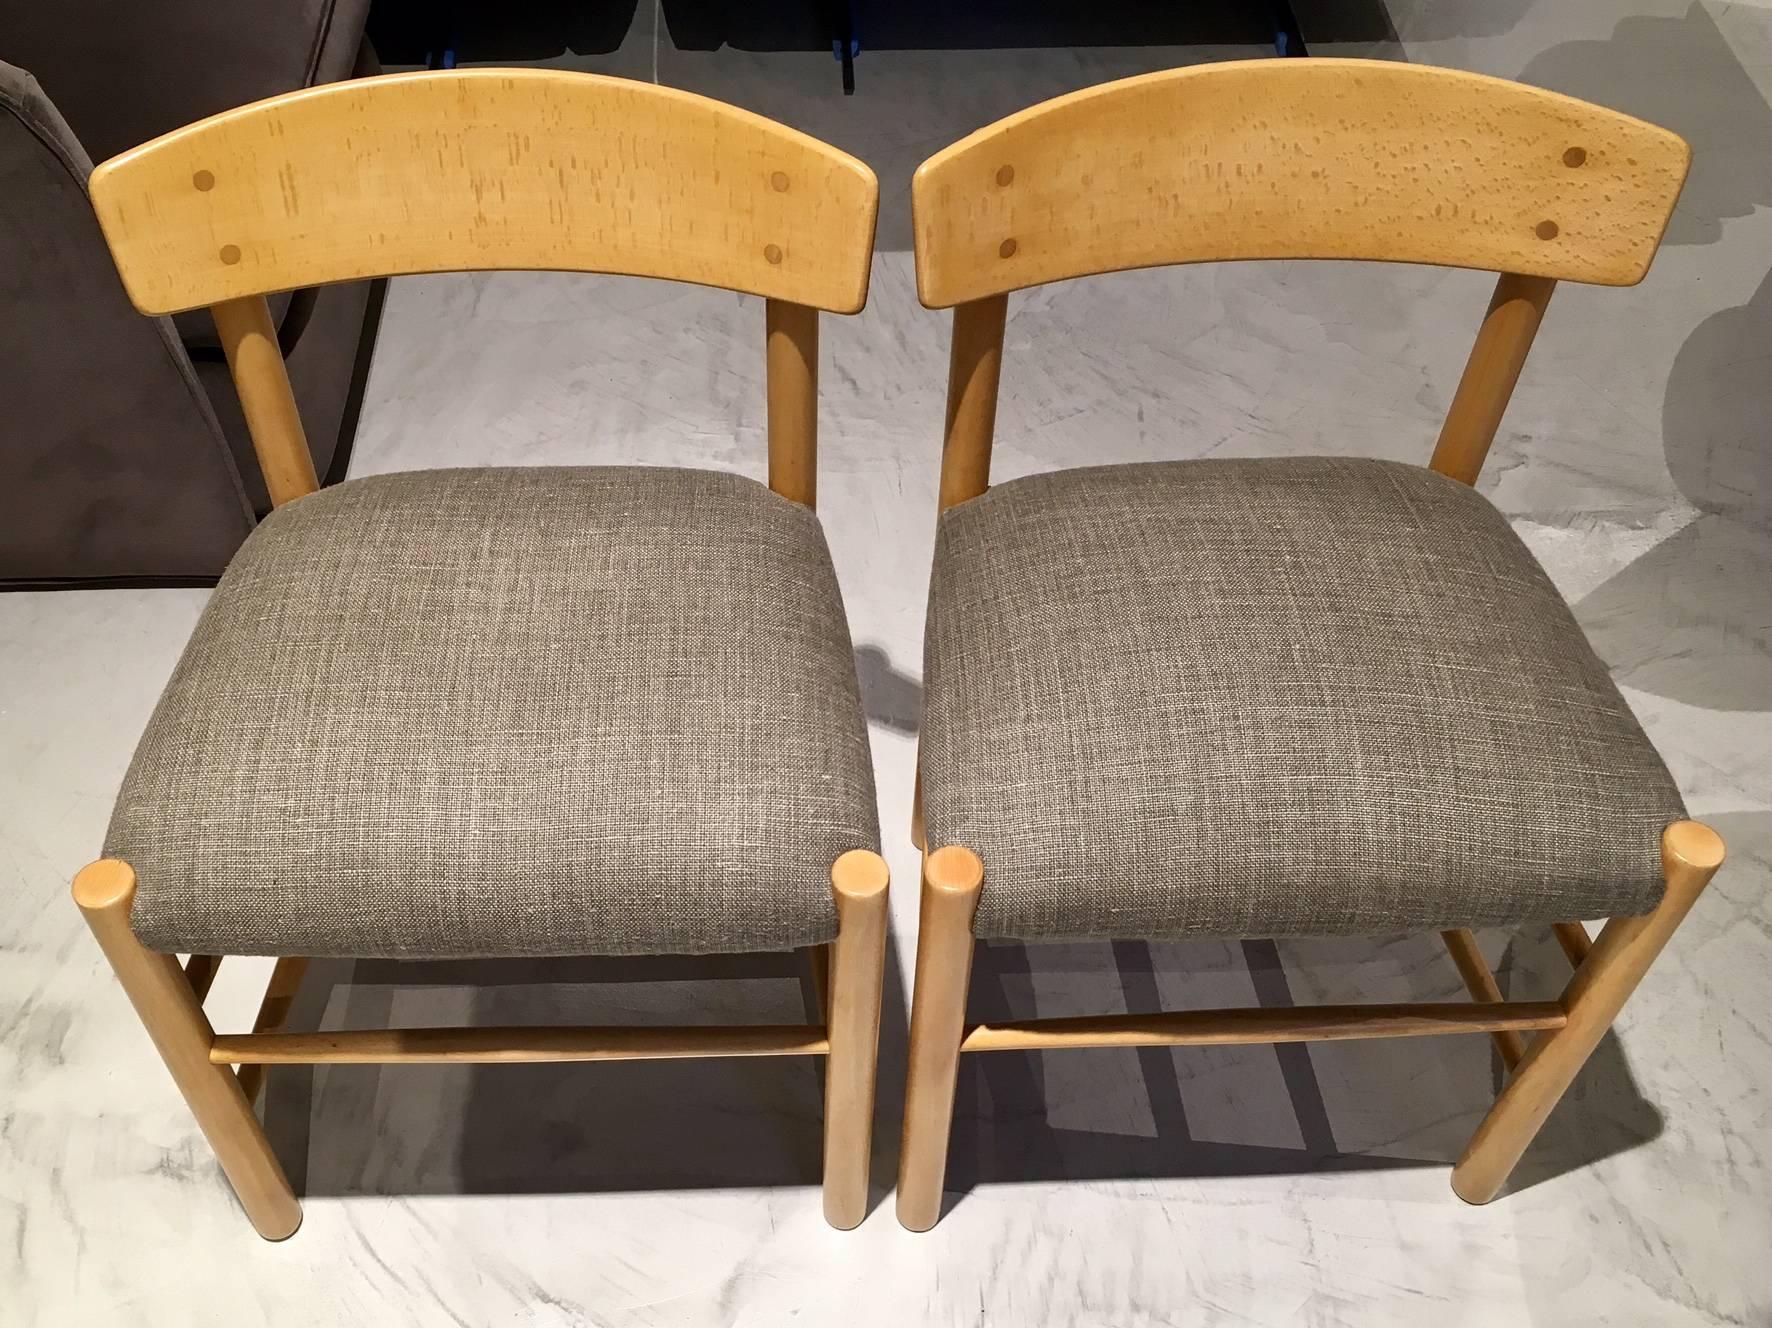 Restored set of six Børge Mogensen J39 Folkestolen, the people's chairs. Designed in 1947. Produced in the 1970s by FDB Møbler. Lacquered beech with seat originally made of paper cord, but now re-upholstered with linen fabric.